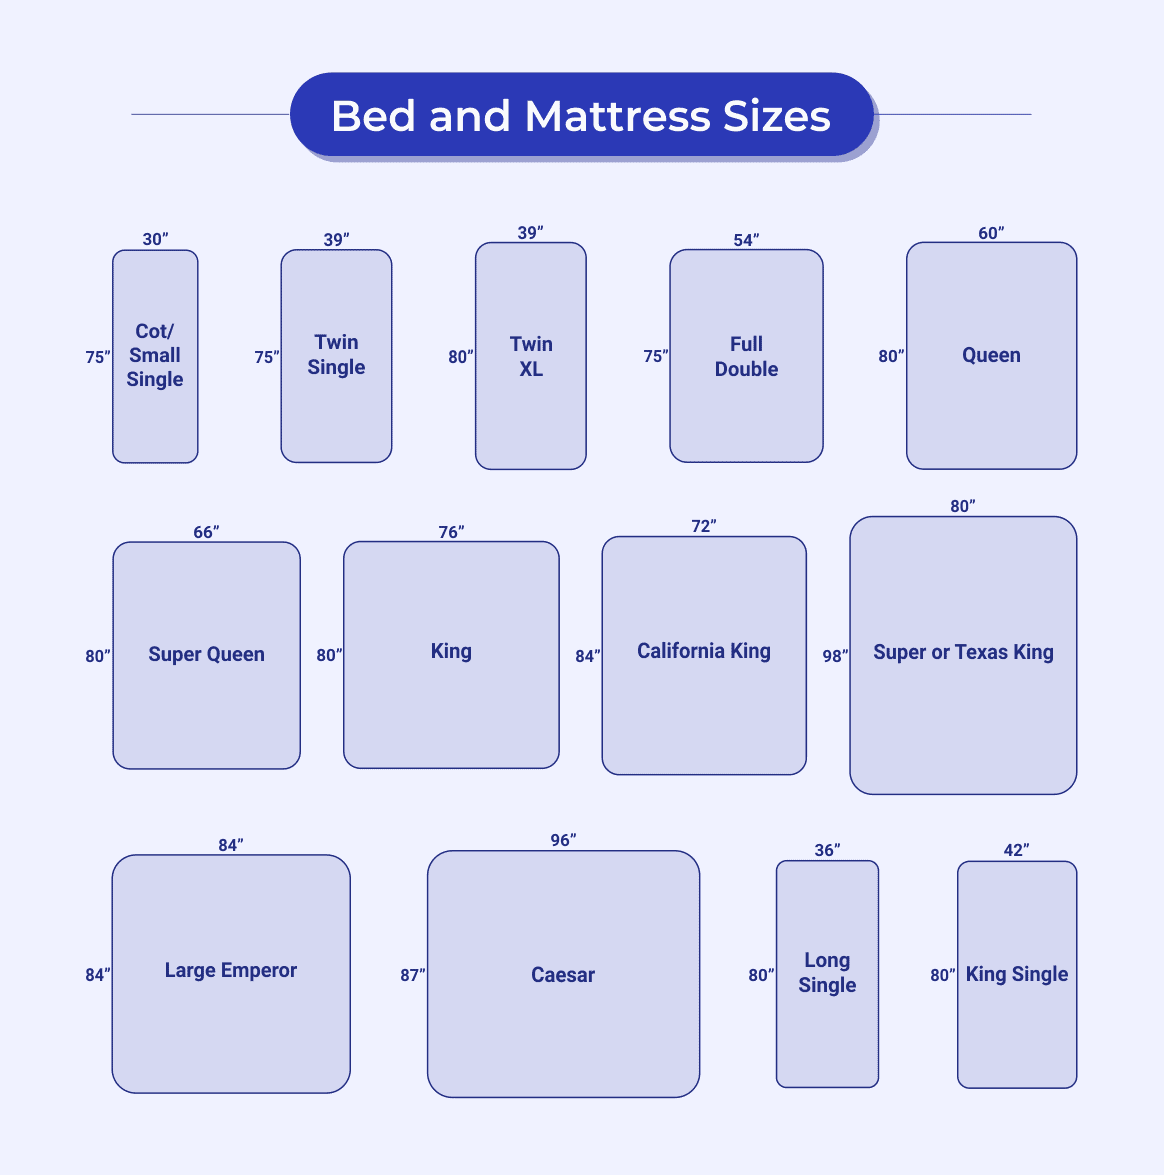 Mattress And Bed Sizes What Are The, Measure Of Twin Size Bed